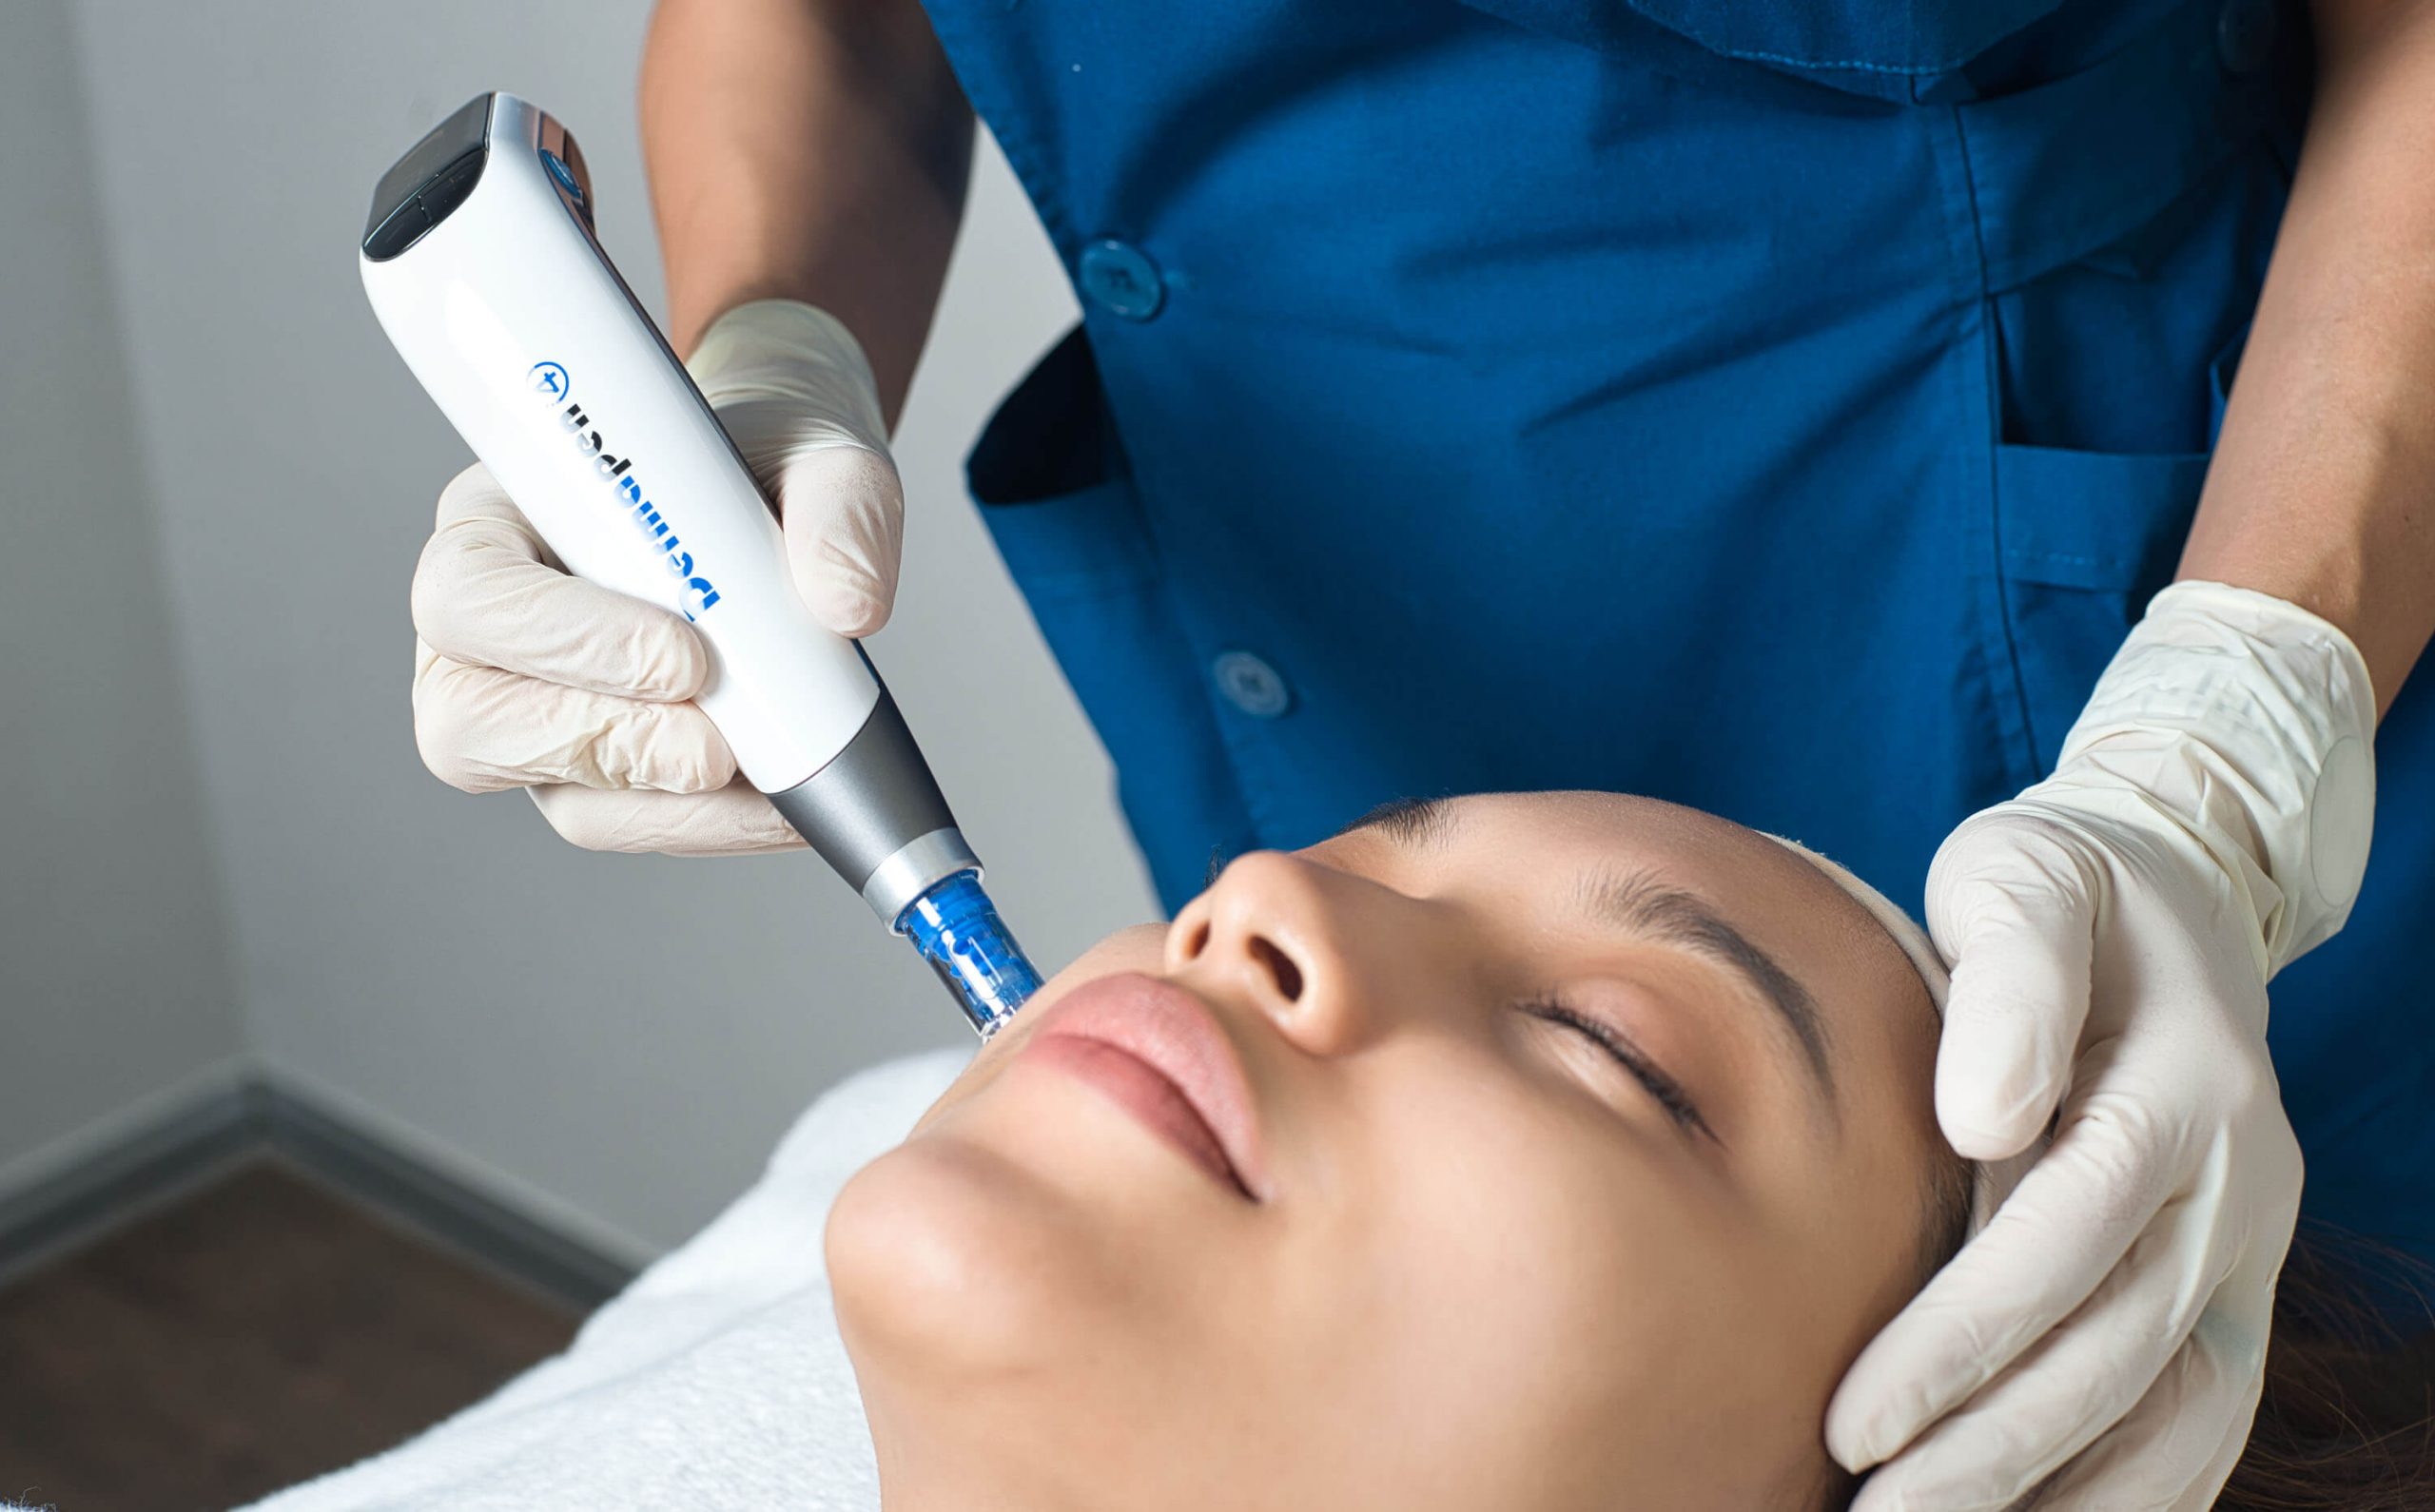 An aesthetician performing treatments on a patient's face, using Dermapen 4.